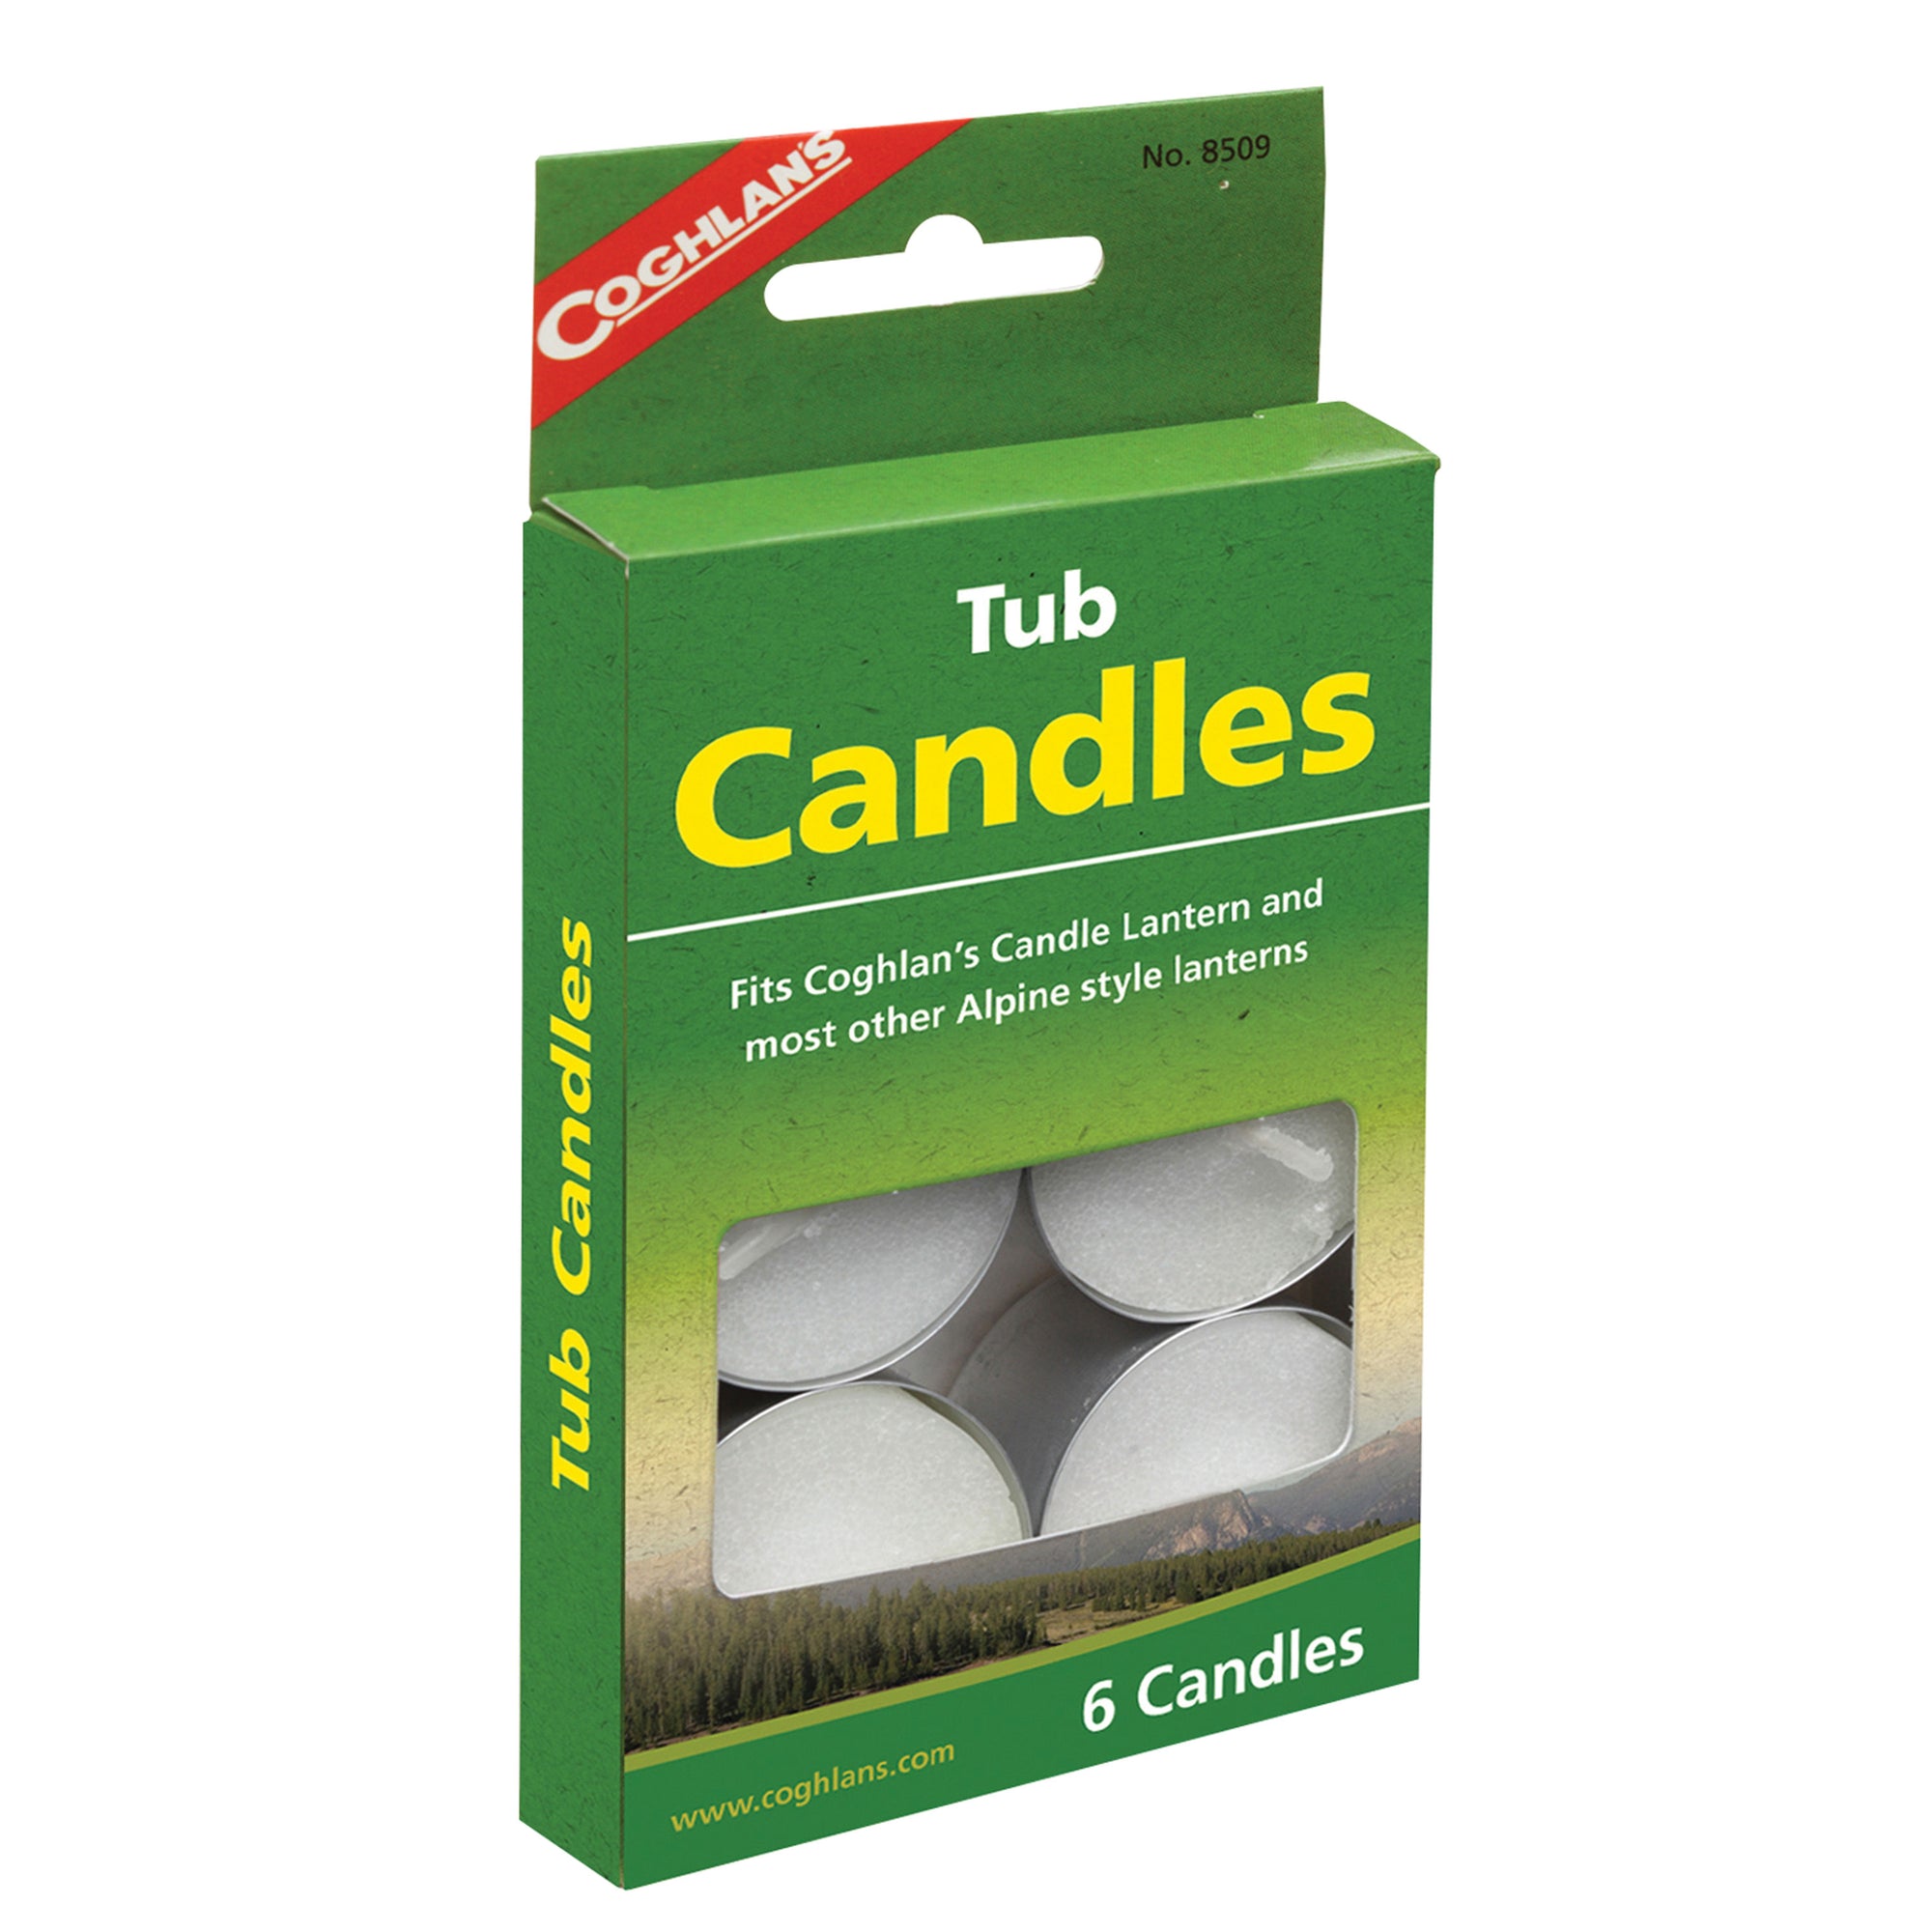 Coghlan's 8509 Tub Candles - 6-Pack